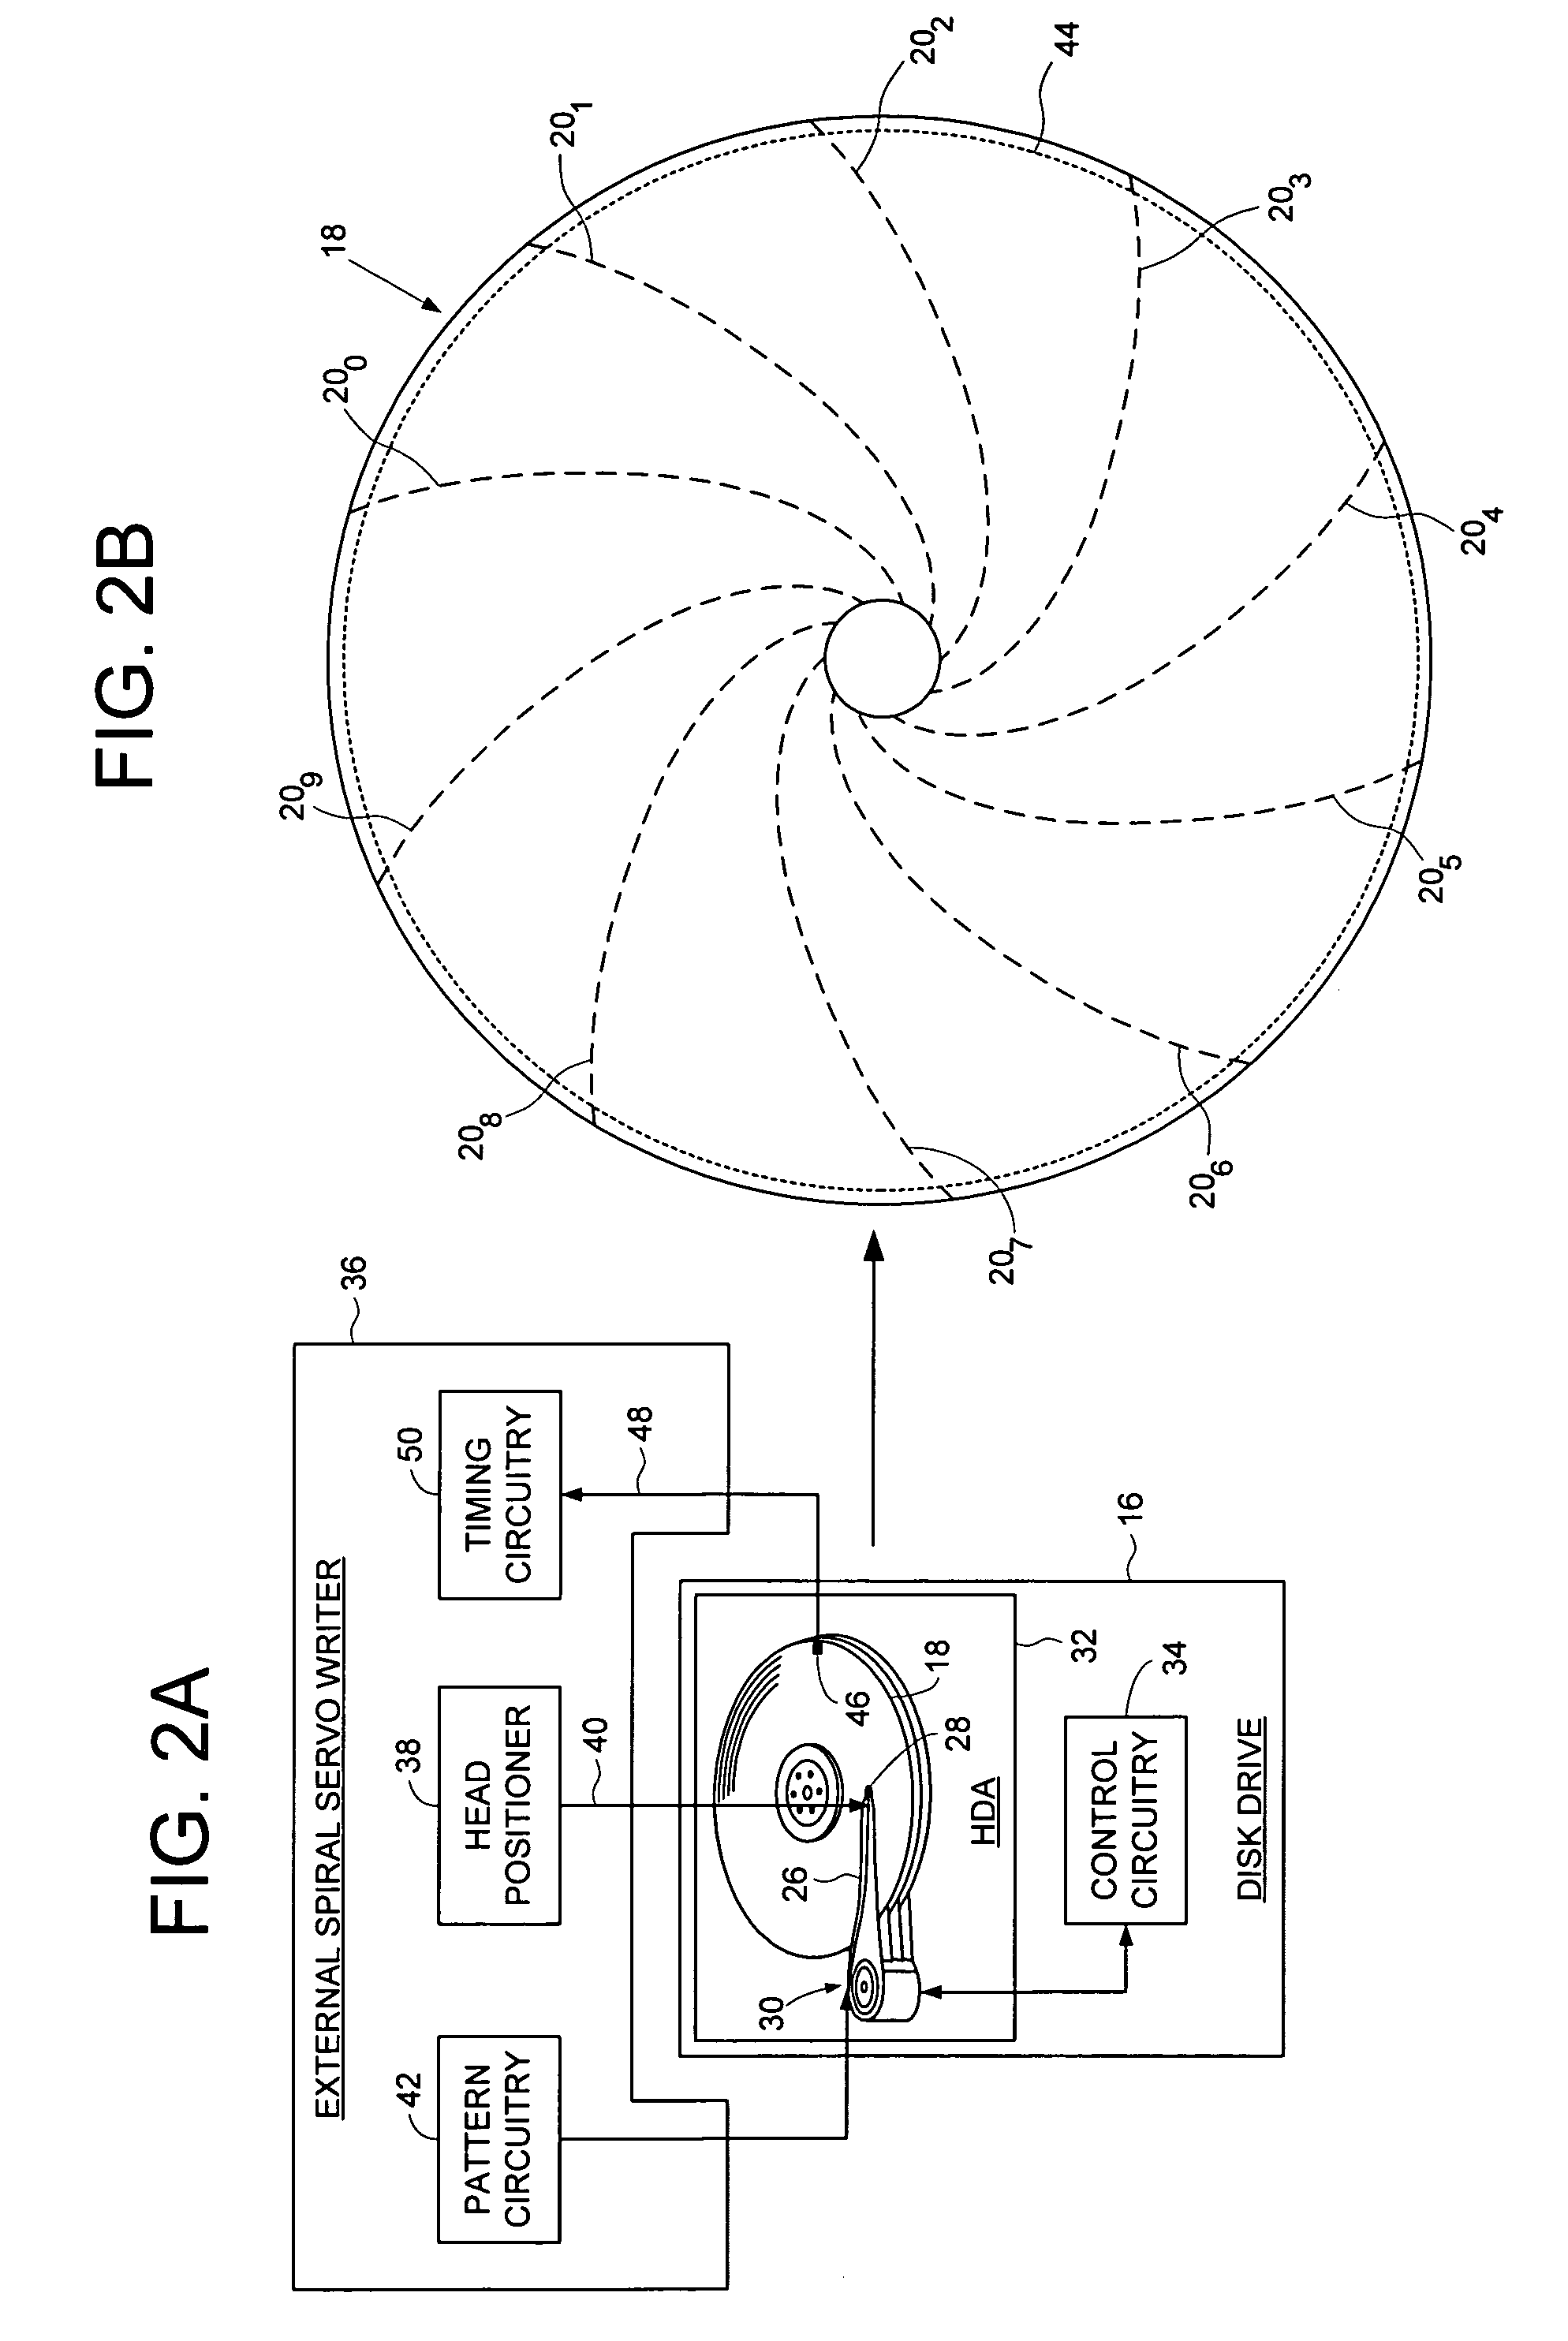 Servo writing a disk drive by synchronizing a servo write clock in response to a sync mark reliability metric